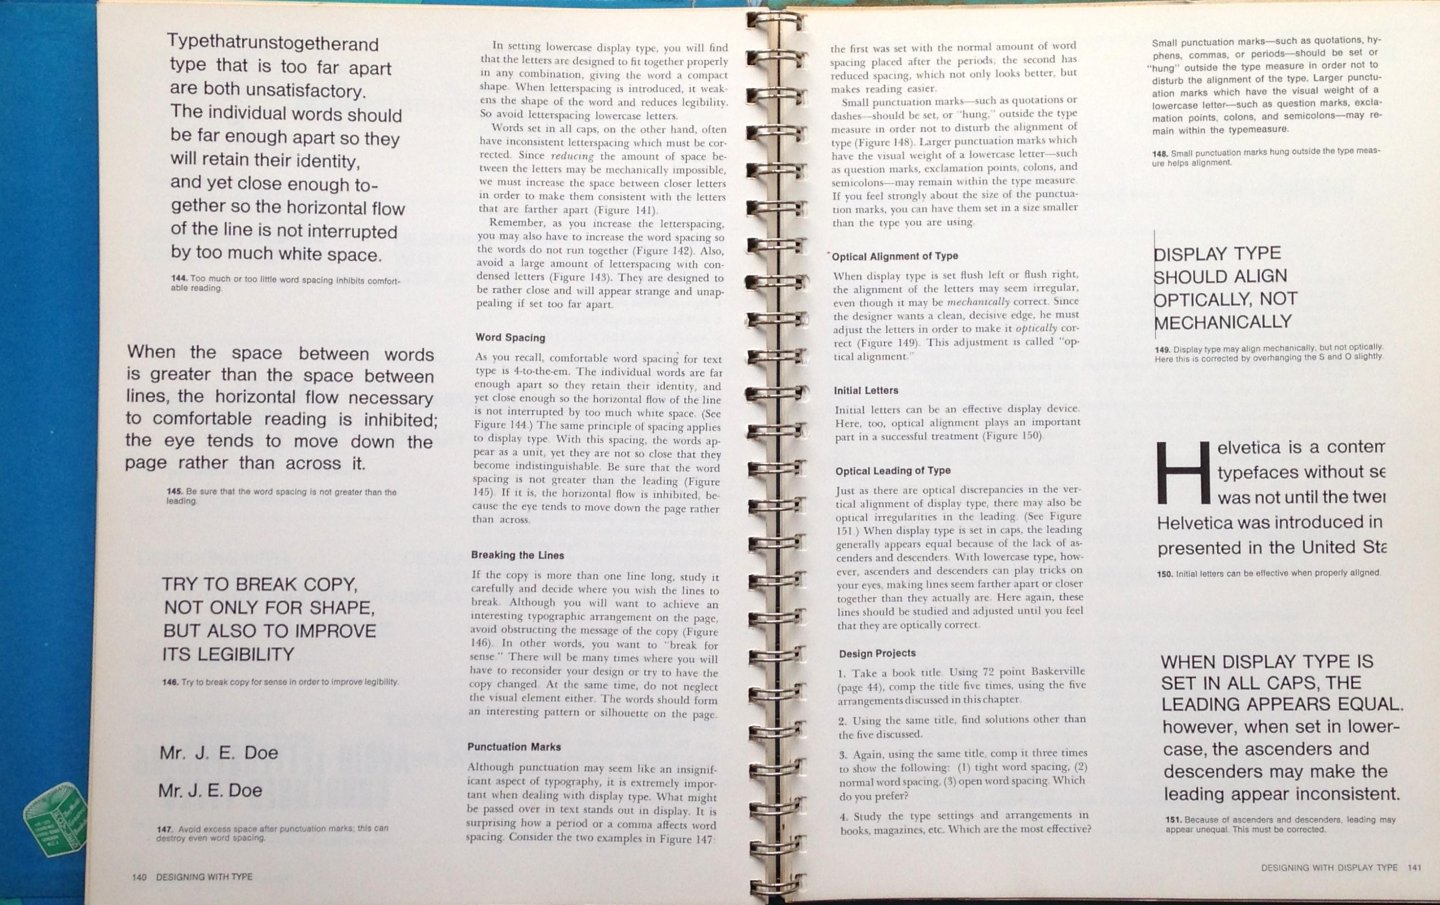 CRAIG, JAMES, EDITED BY SUSAN E. MEYER - Designing with Type -  A Basic Course in Typography